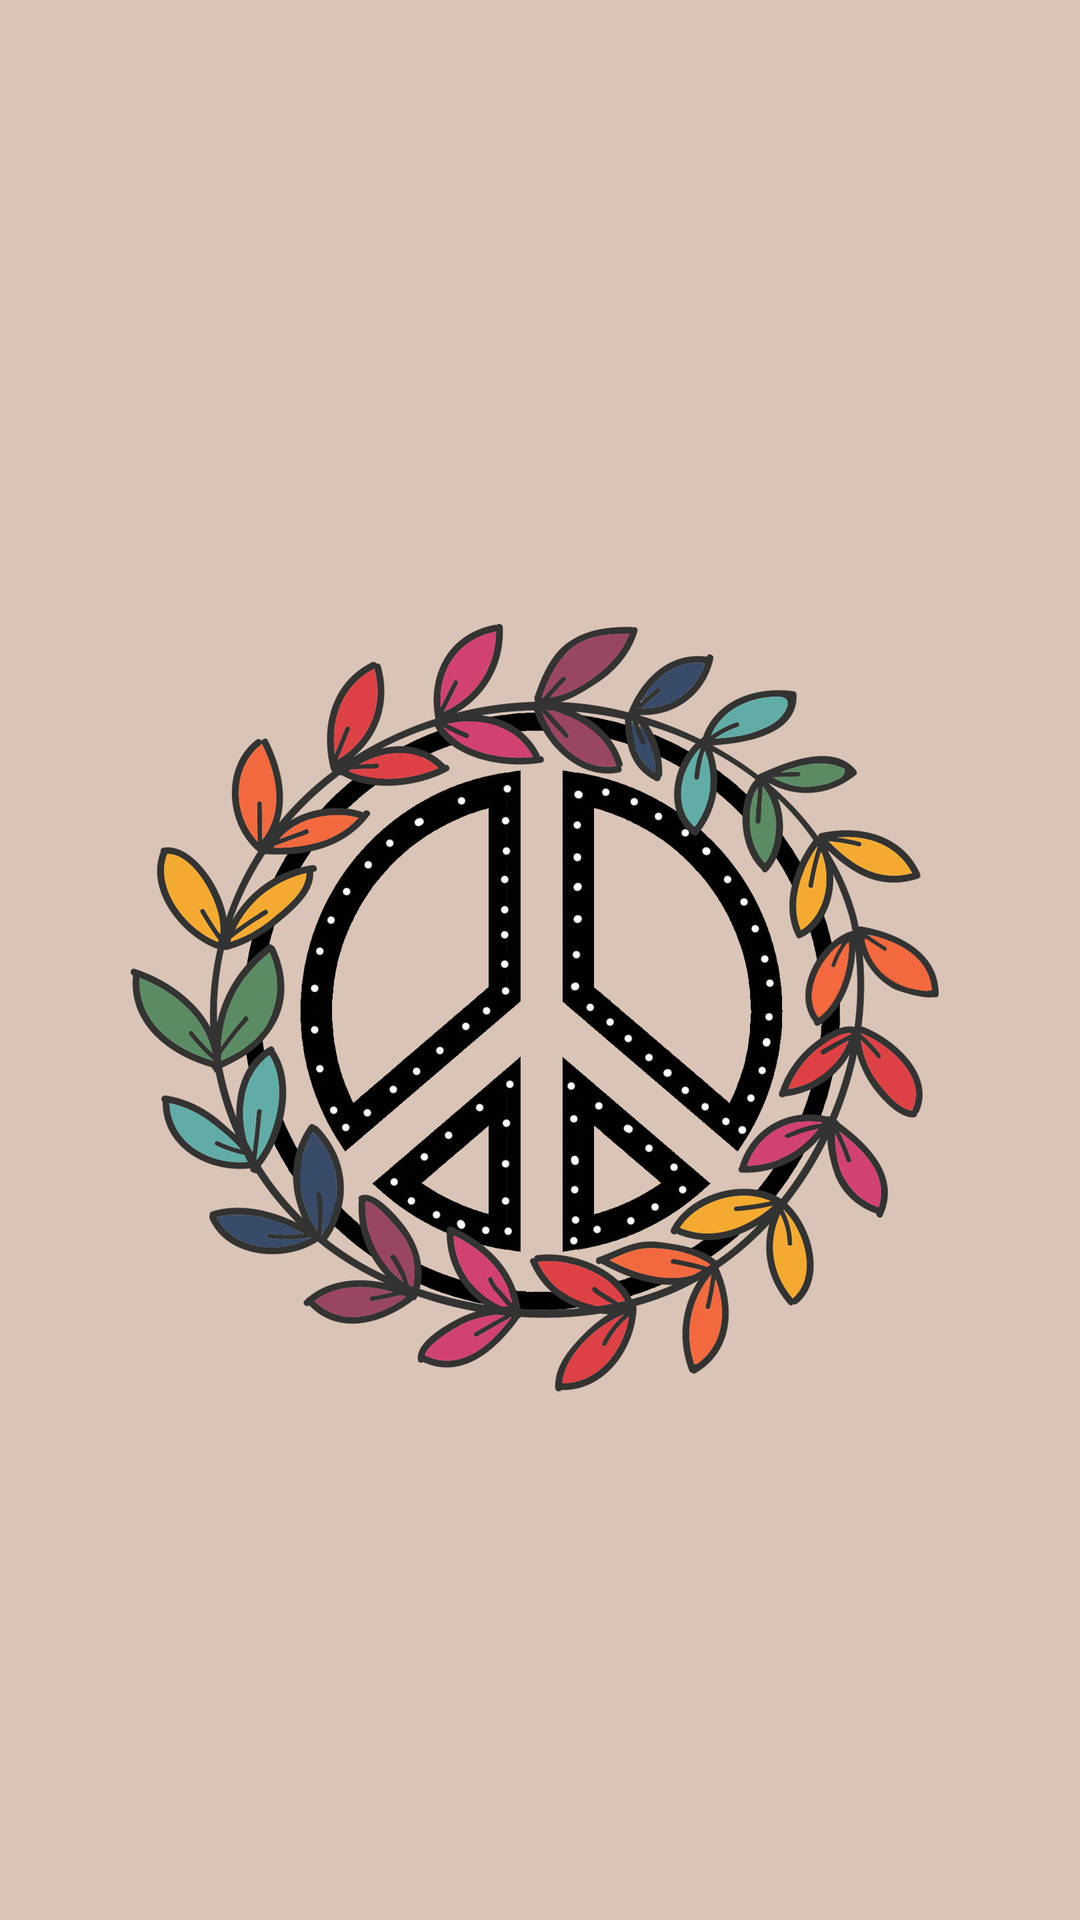 Free Peace Wallpaper Downloads, [100+] Peace Wallpapers for FREE |  